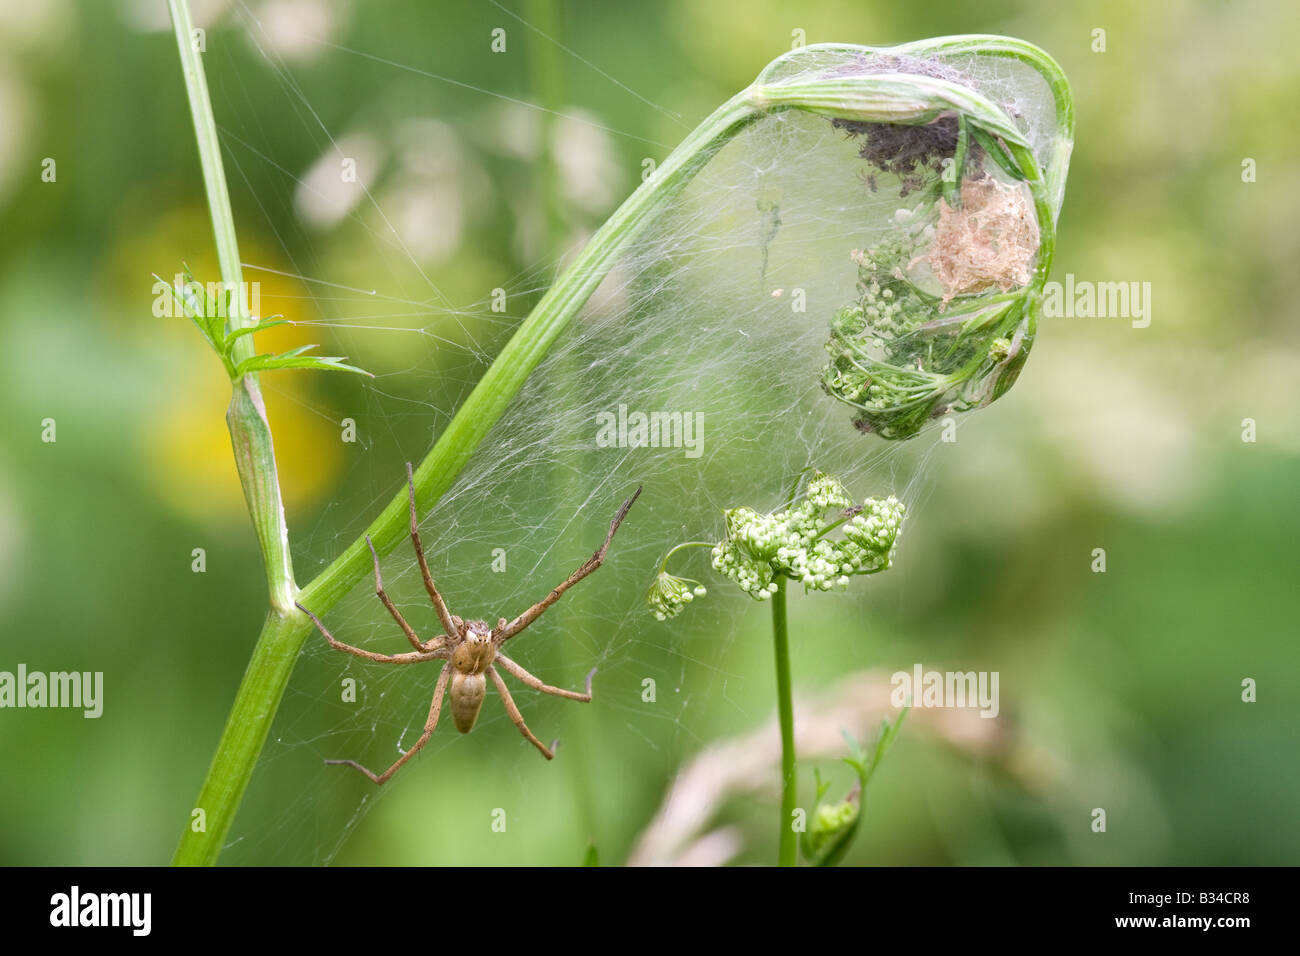 Nursery Web Spider Pisaura mirabillis adult female spider guarding freshly hatched spiderlings in web on an umbellifer plant Stock Photo